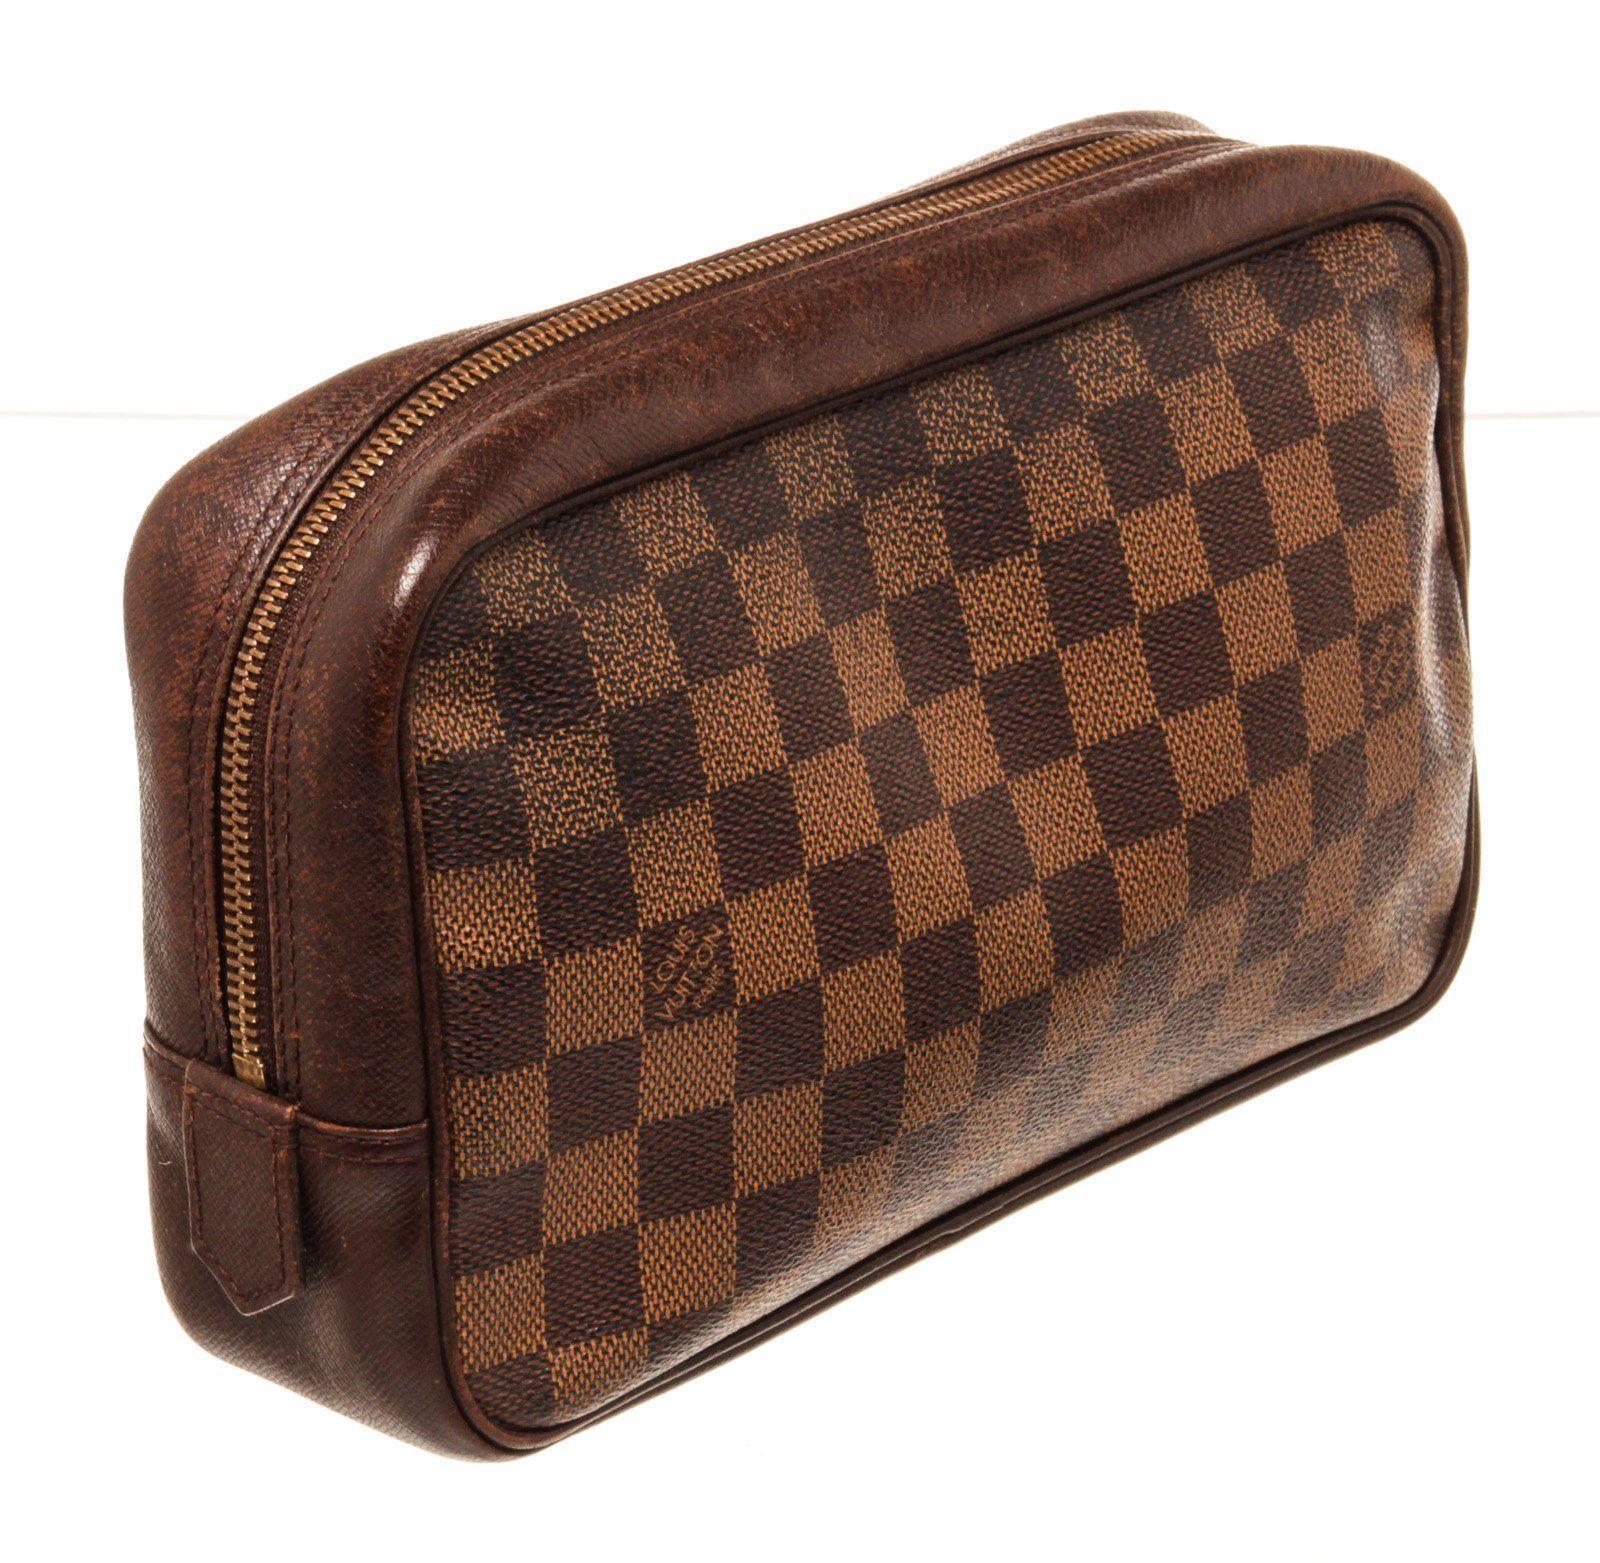 Louis Vuitton Brown Damier Canvas Toiletry Pouch Cosmetic Bag with material damier canvas, gold-tone hardware, trim tan vachetta leather, interior slip pocket and zipper closure.


41403MSC